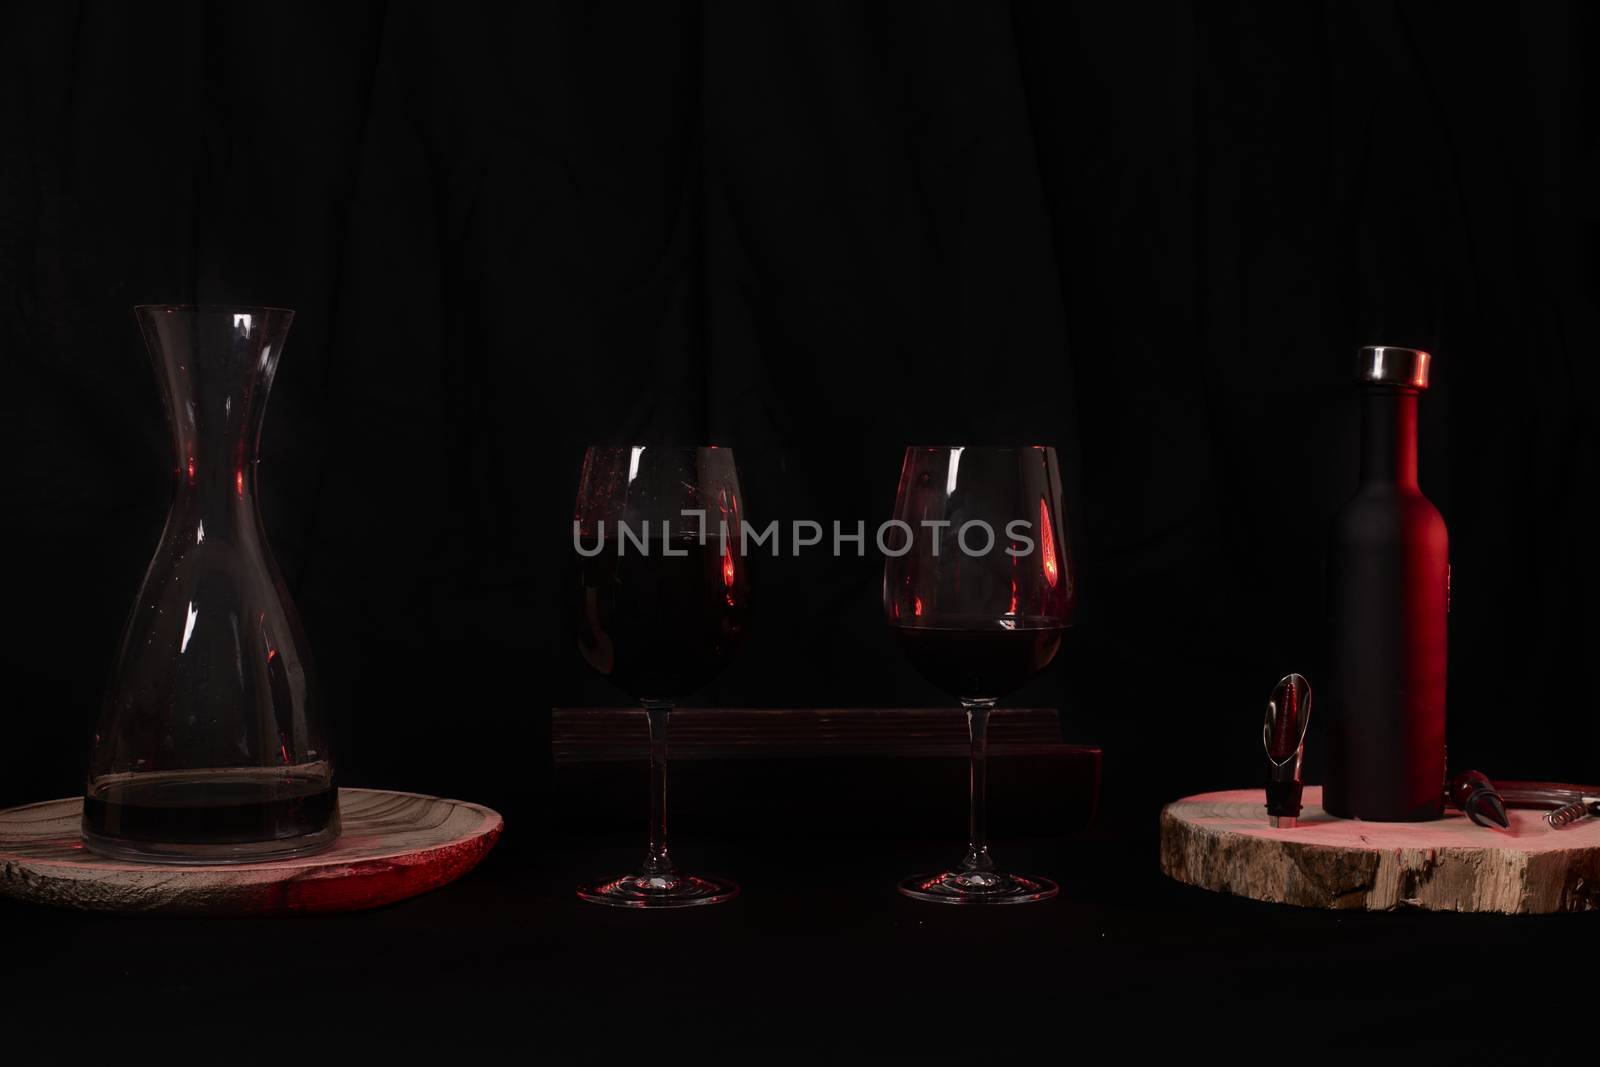 Wine glasses with bottle and pourer. by raul_ruiz